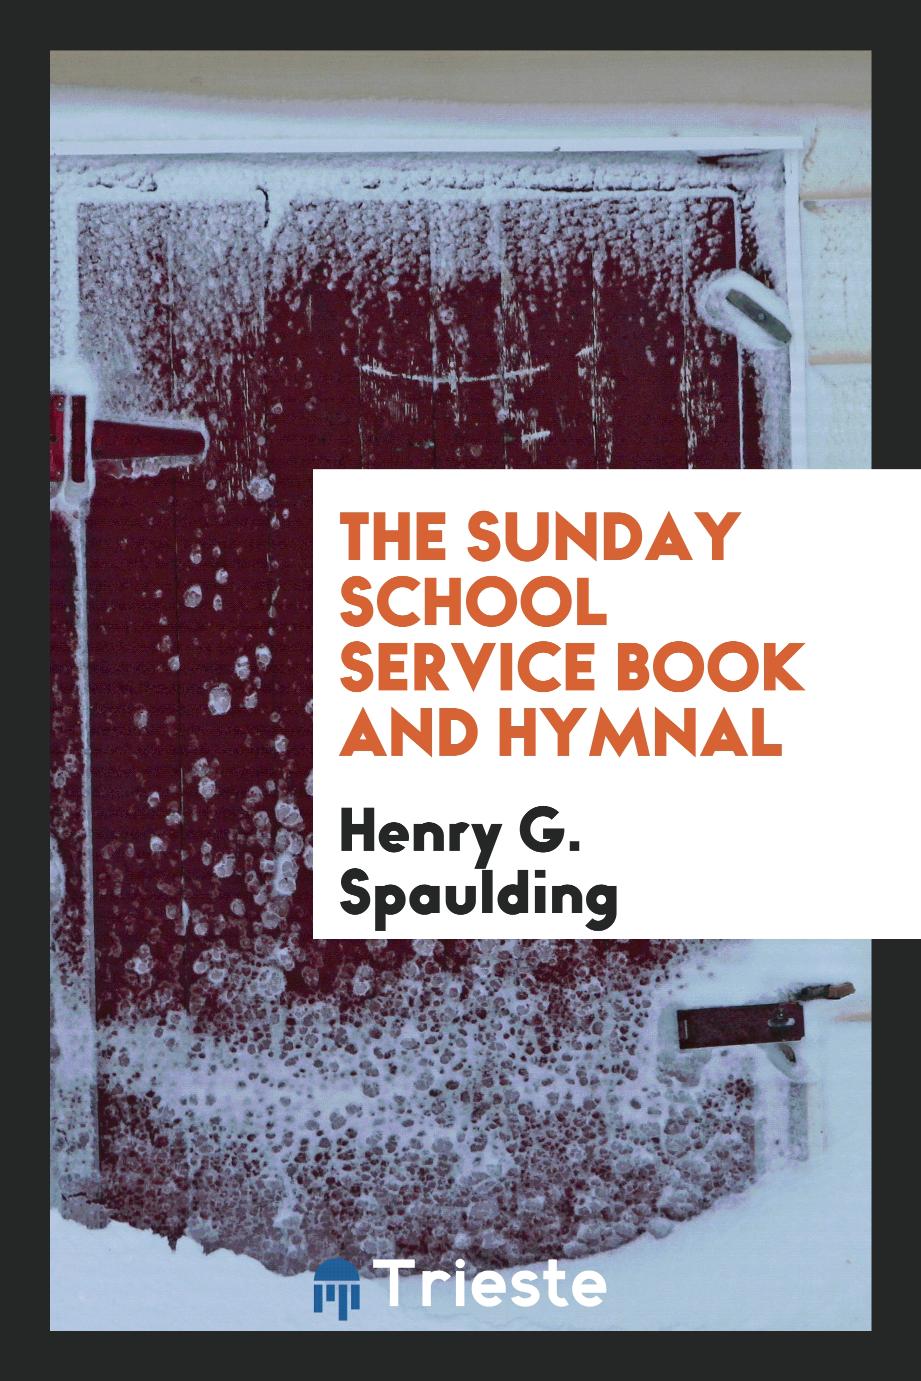 The Sunday School Service Book and Hymnal